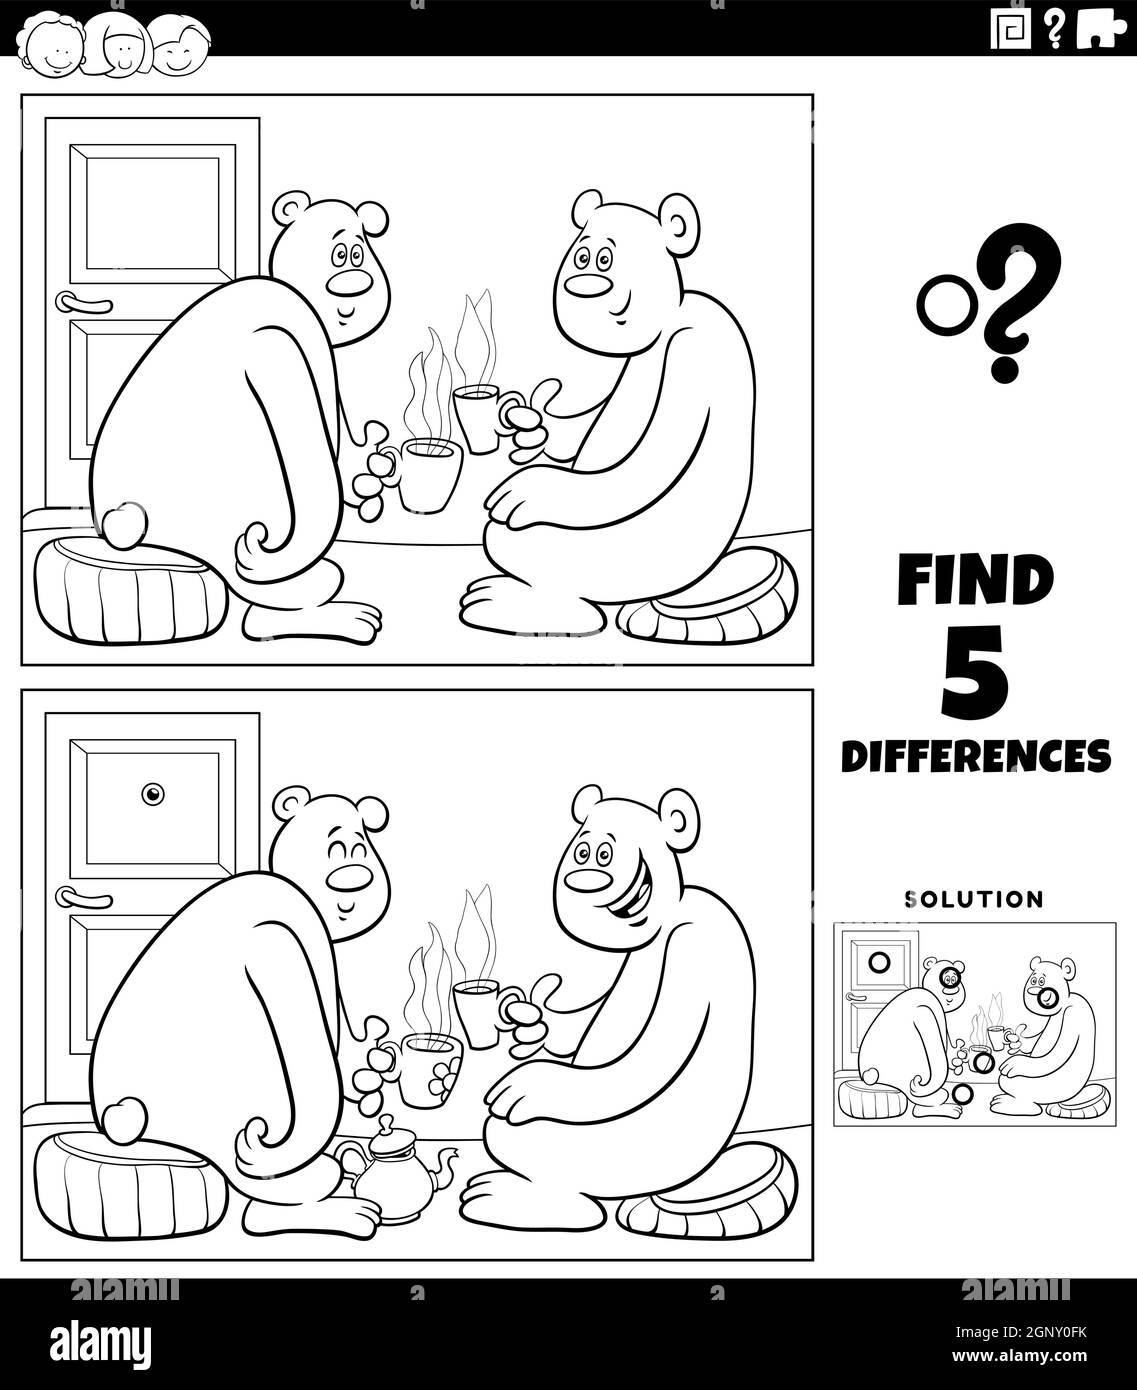 differences educational game with bears drinking tea coloring book page Stock Vector